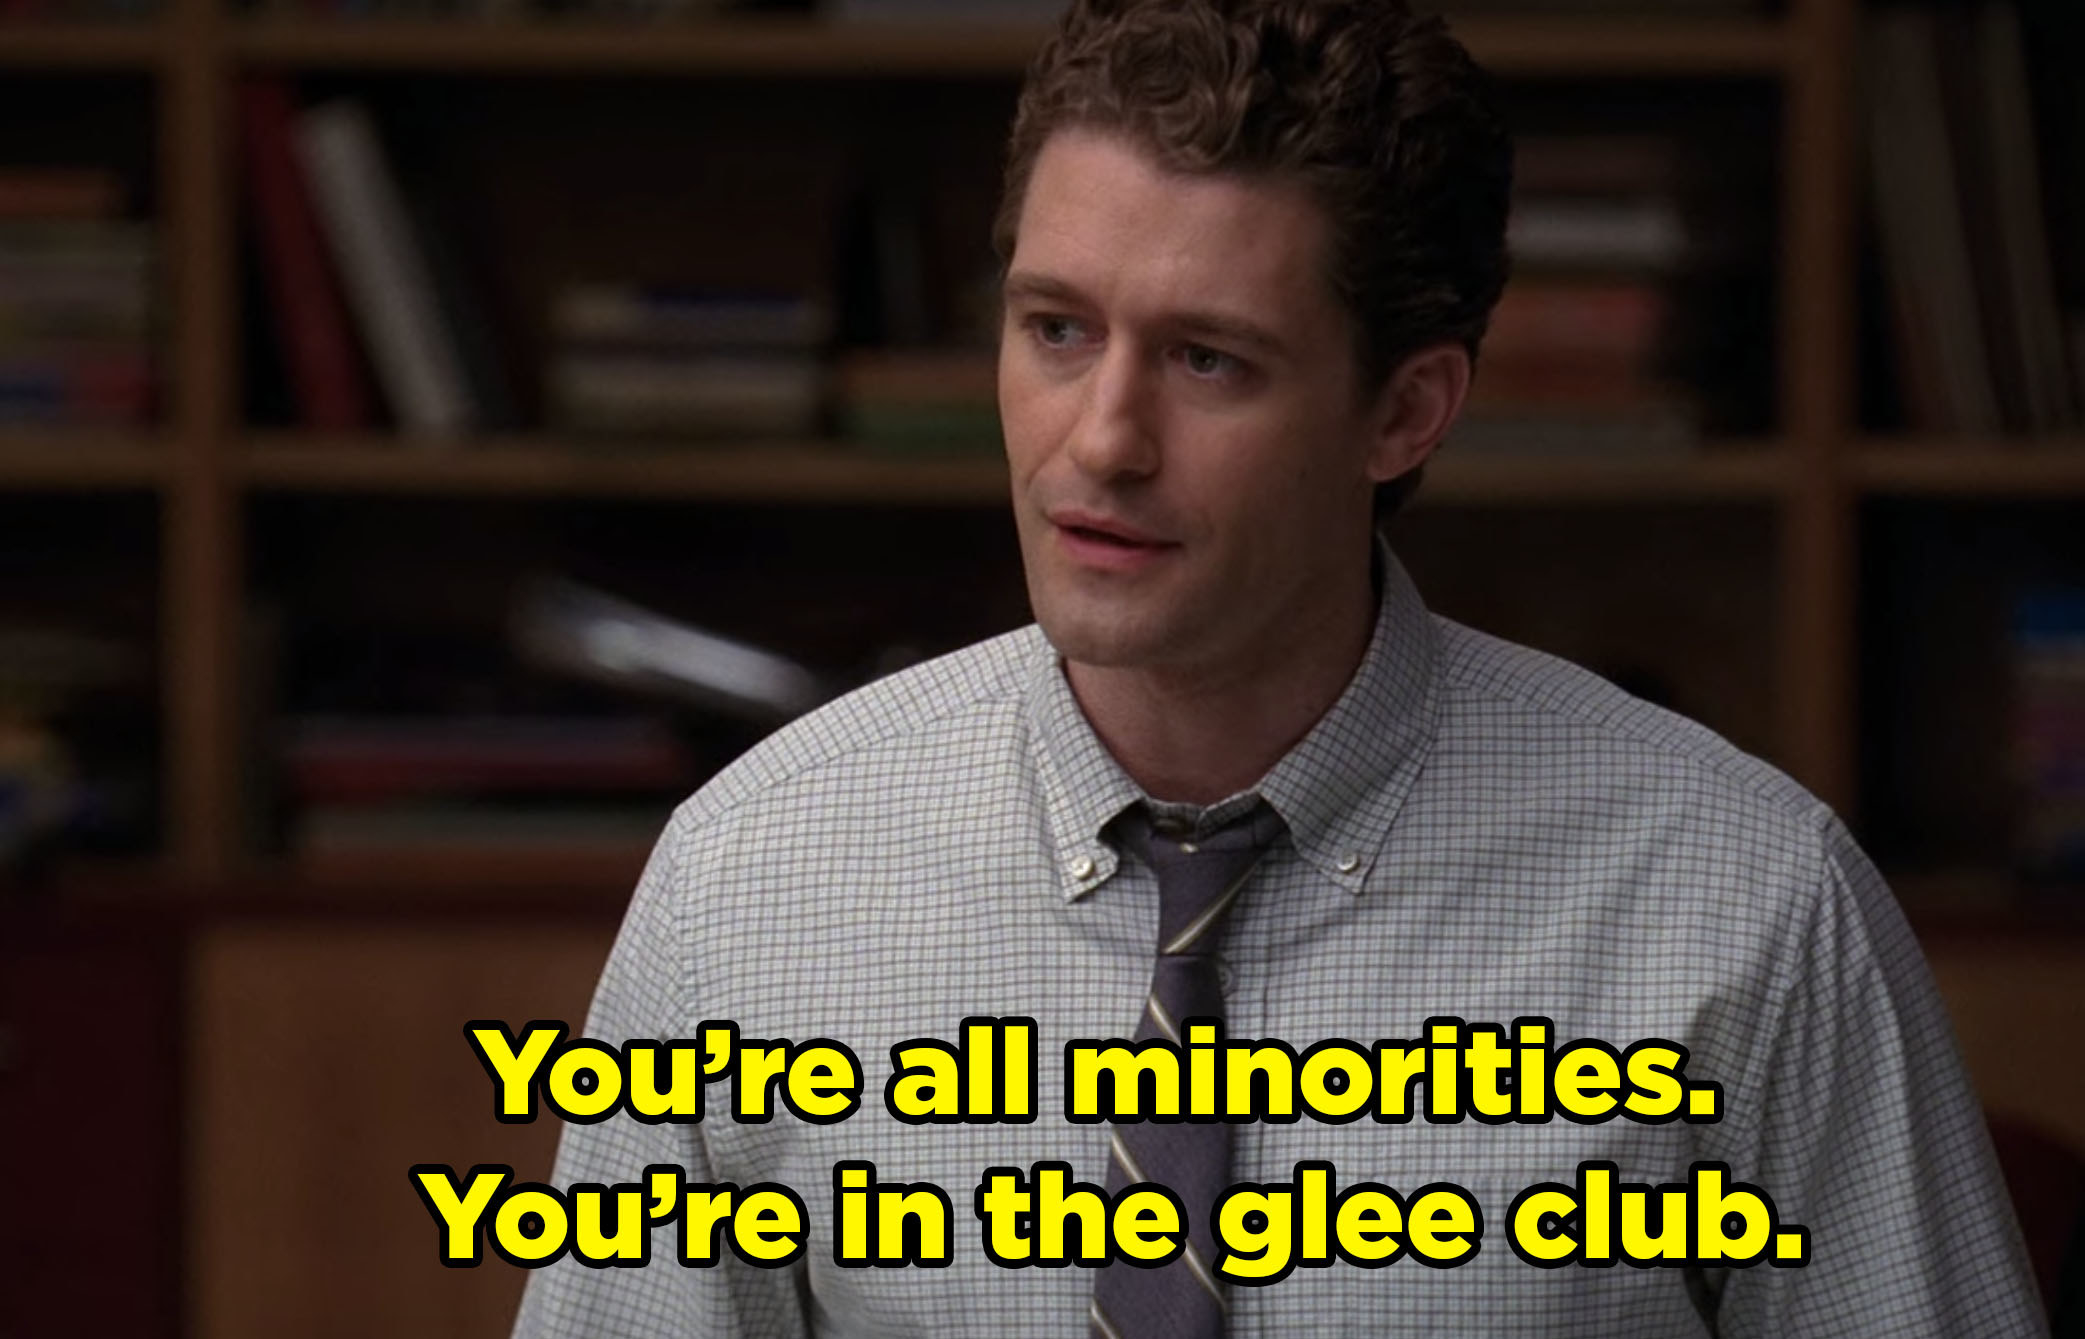 Mr. Schue telling the New Directions, "You're all minorities. You're in the glee club."